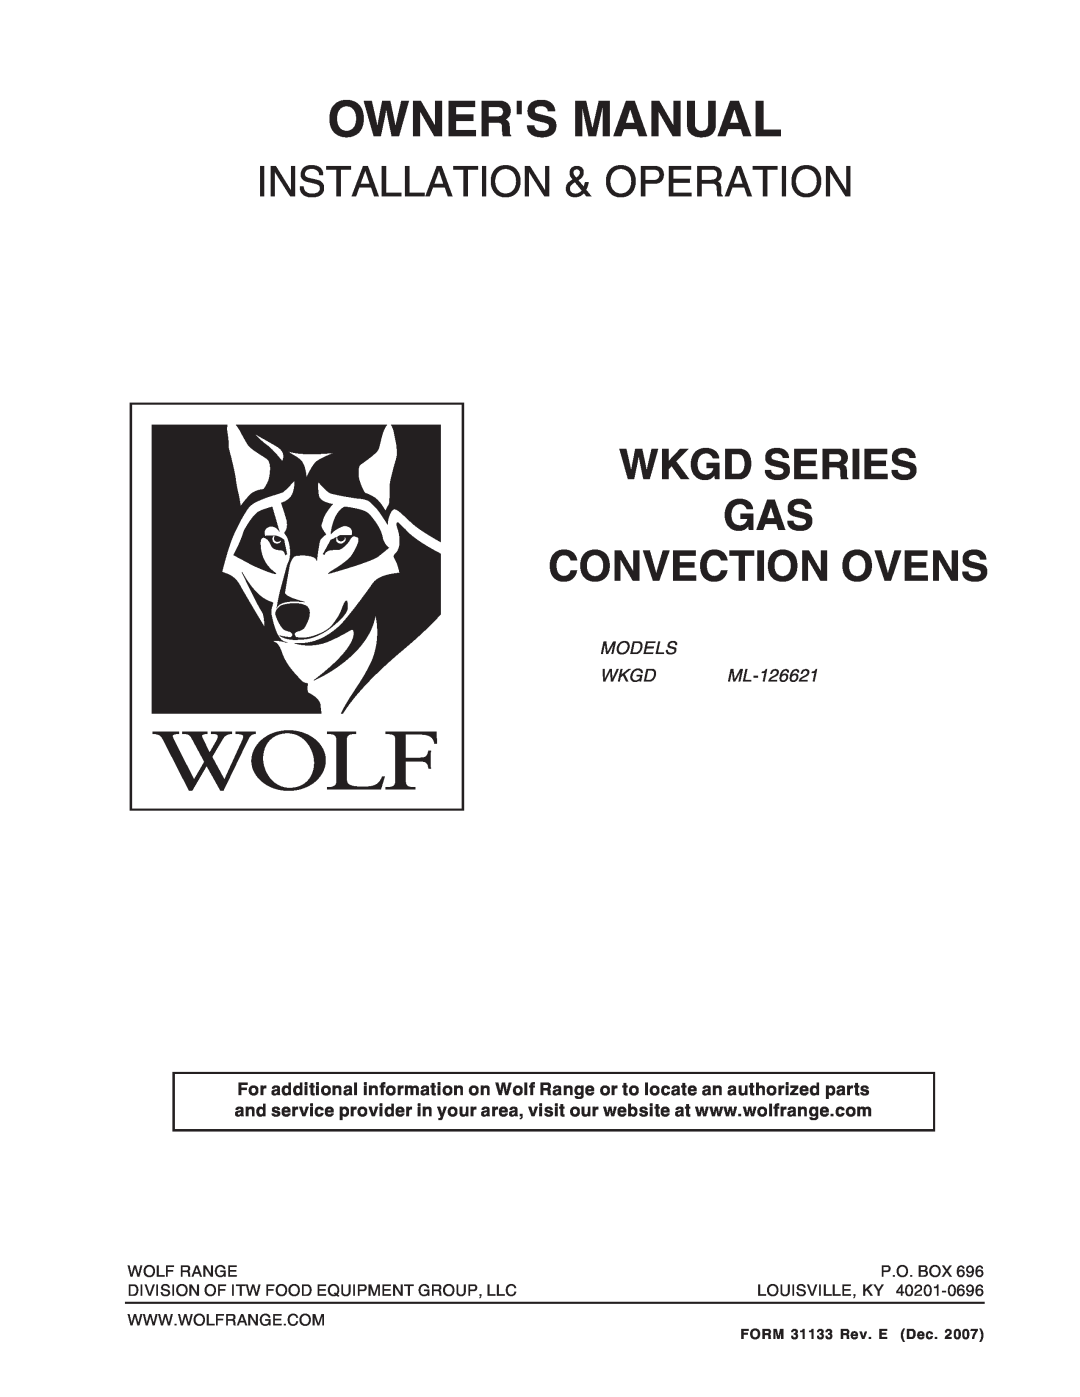 Wolf Appliance Company WKGD ML-126621 owner manual Installation & Operation, Wkgd Series Gas Convection Ovens 